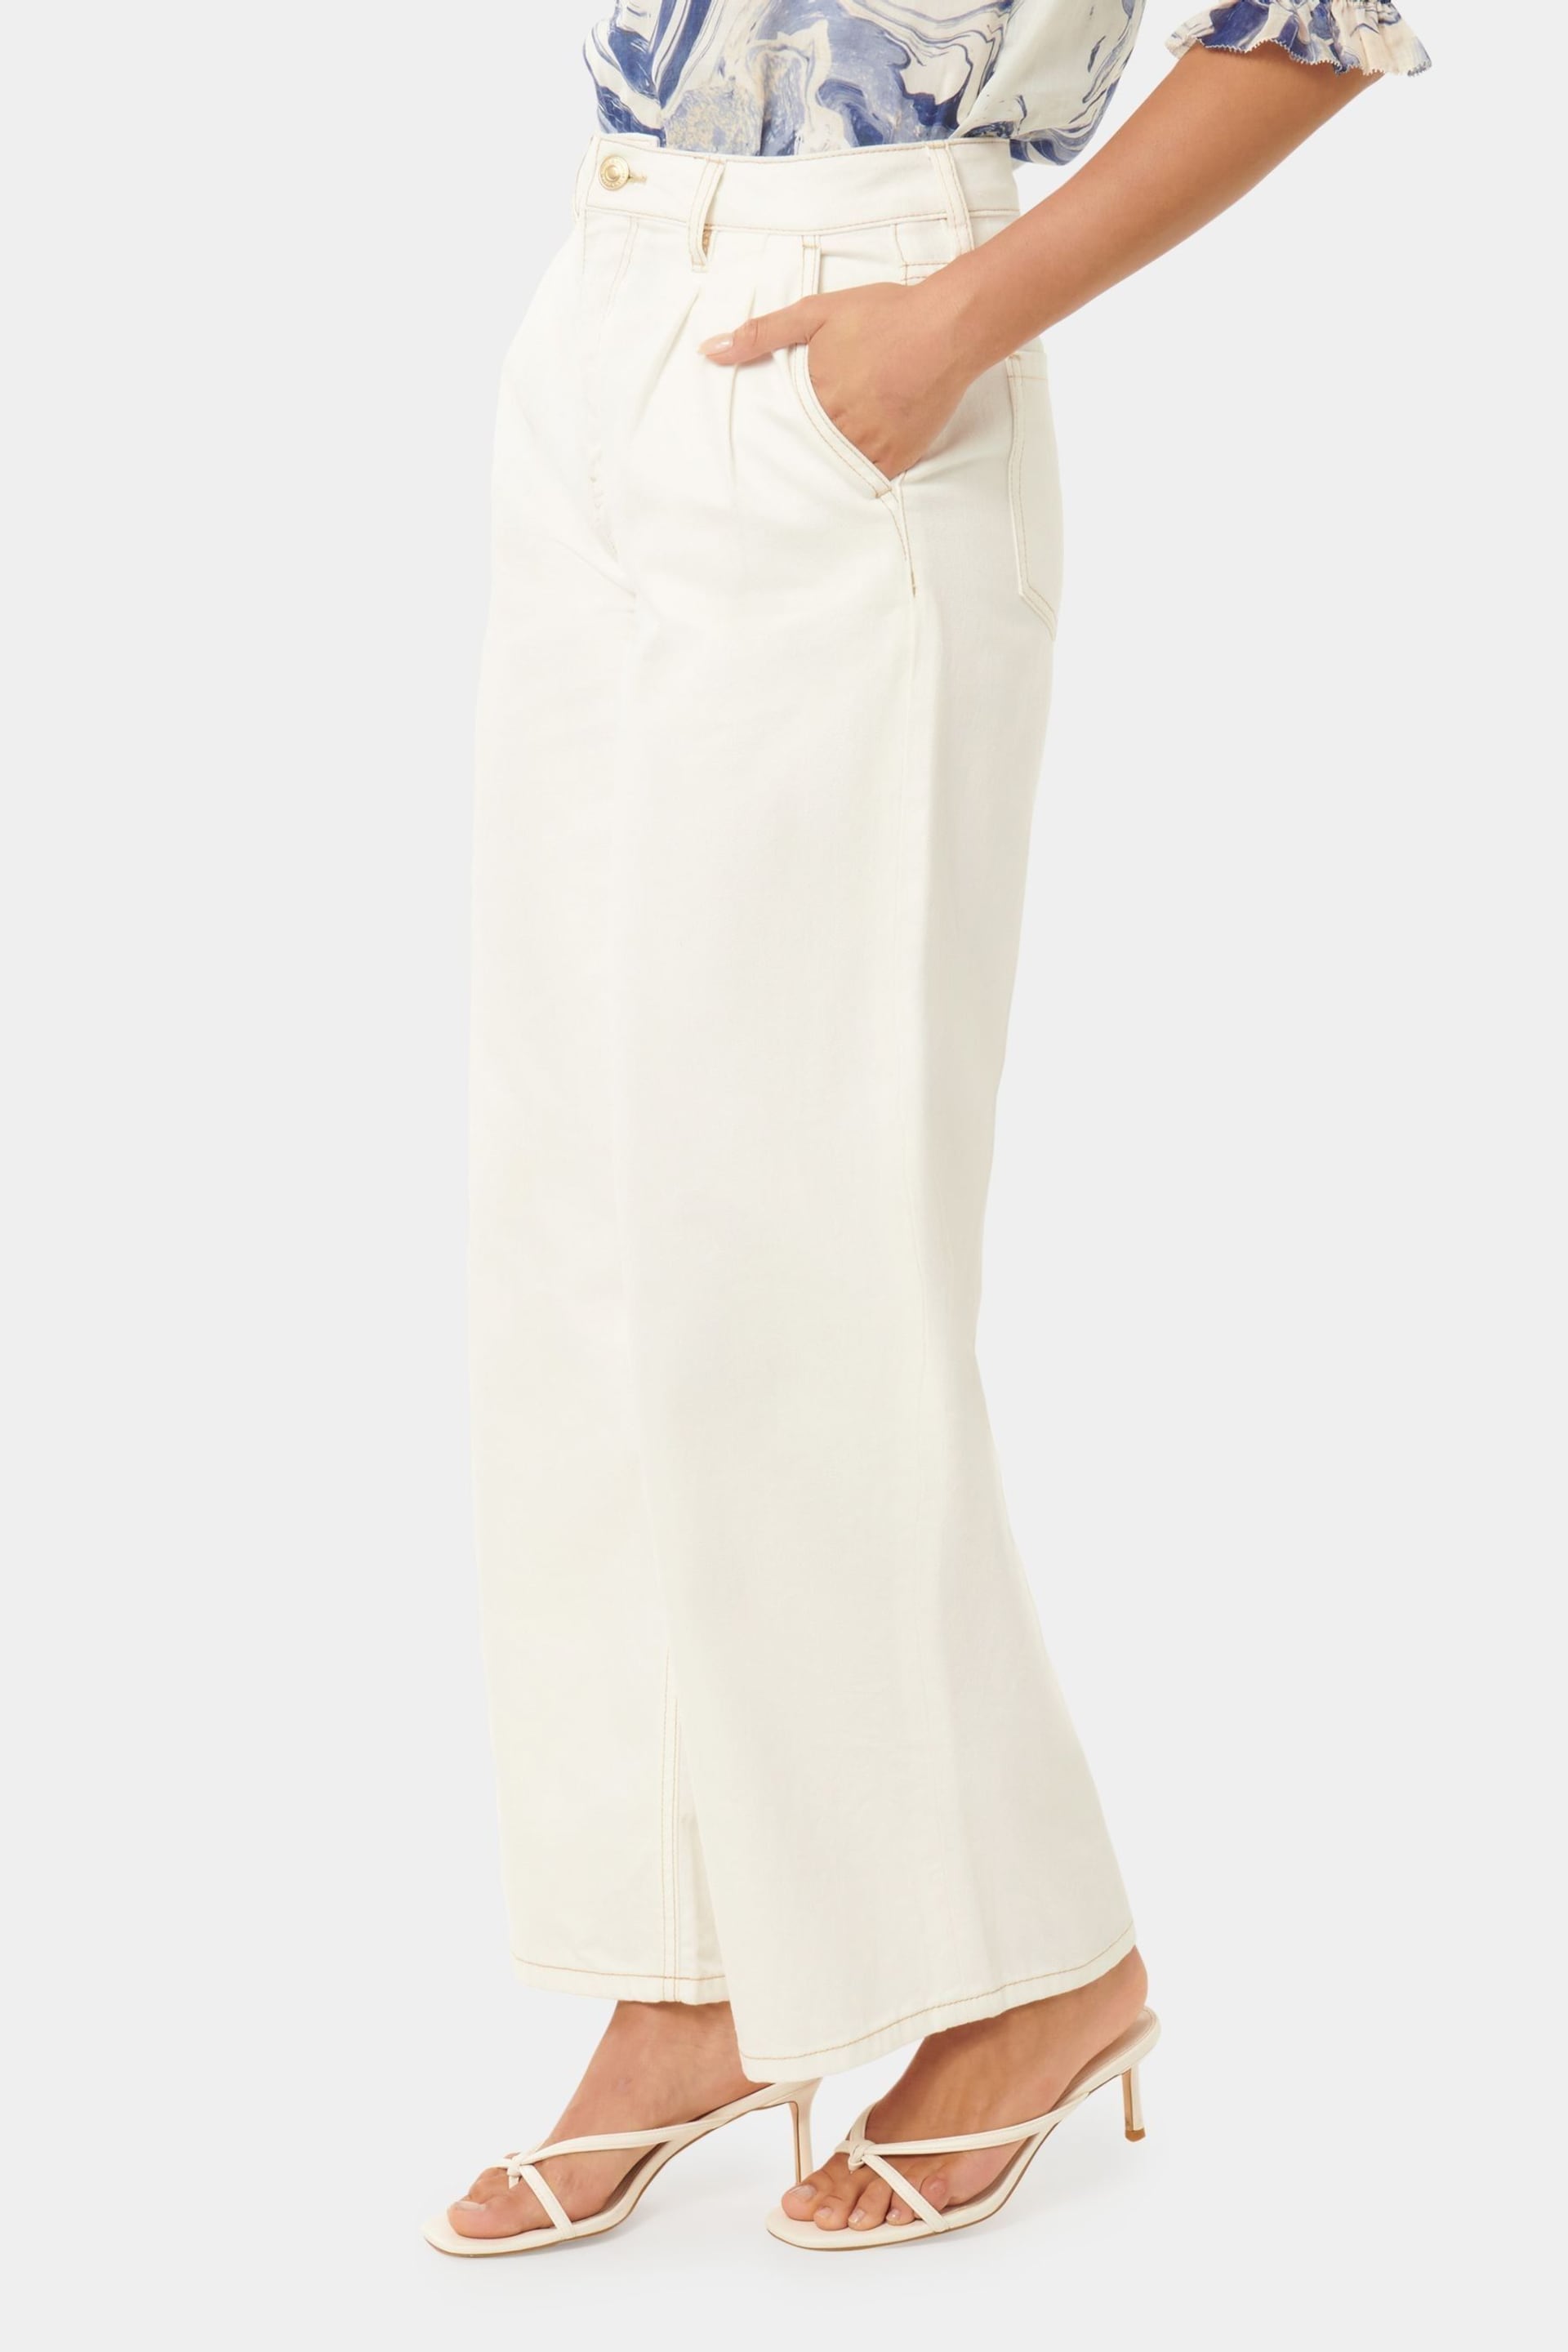 Forever New White Pippa Wide Leg Jeans - Image 3 of 5